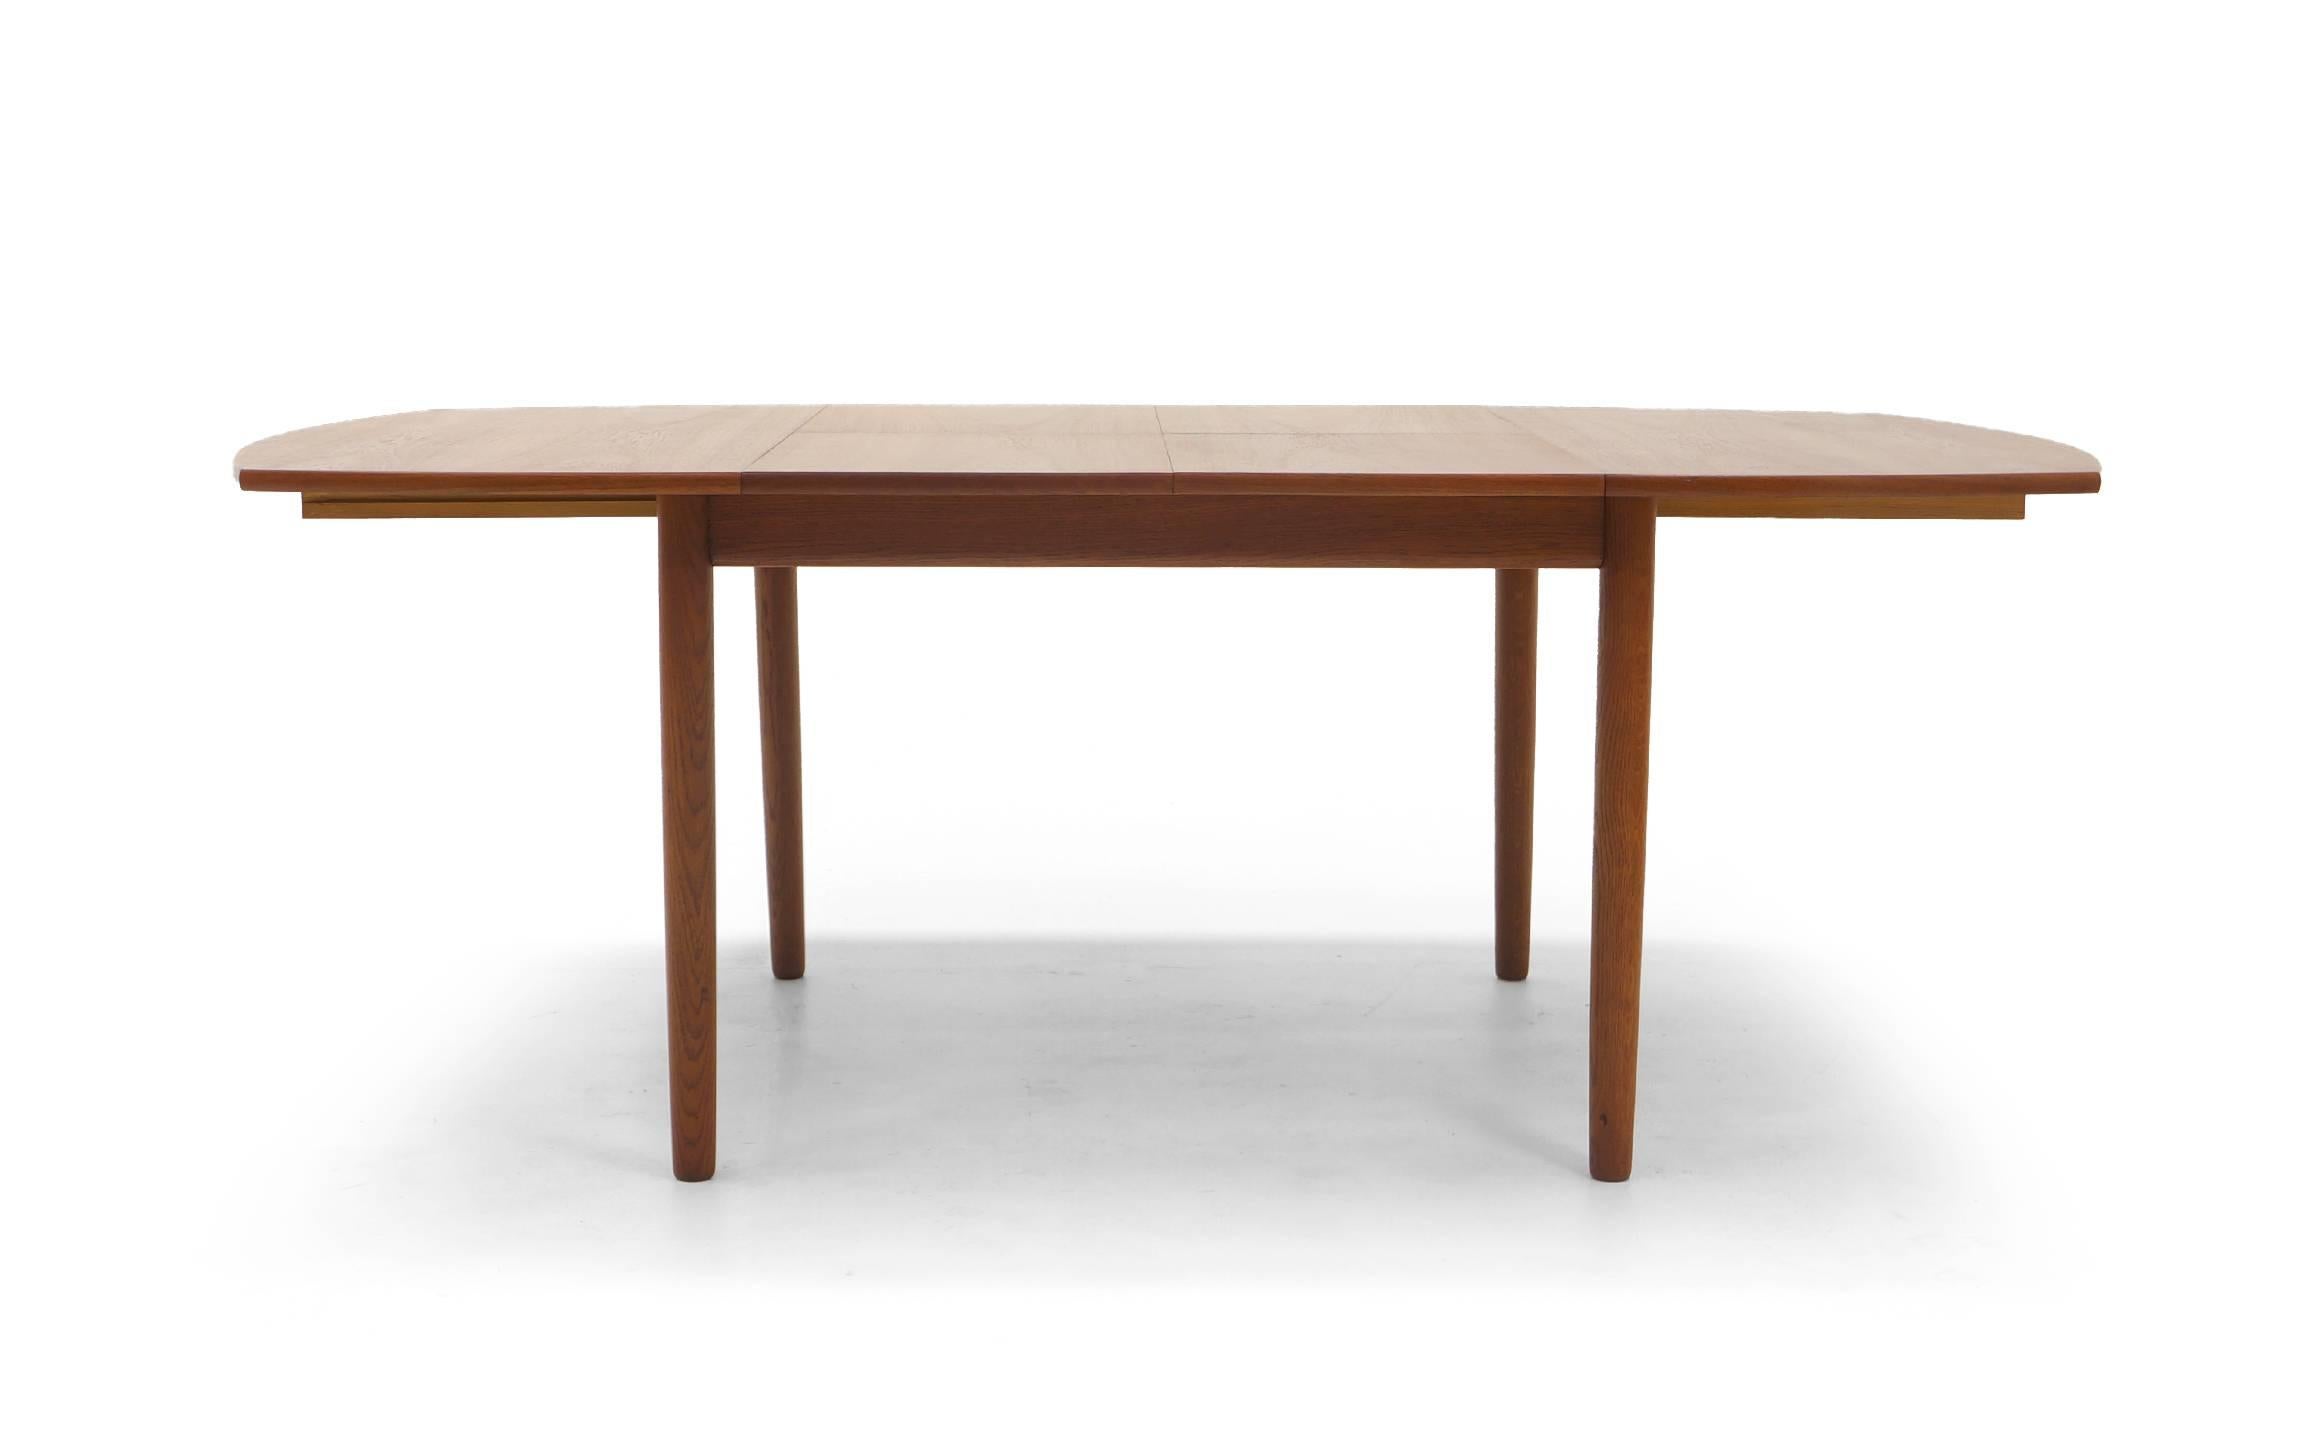 Teak dining or kitchen table designed by Ejner Larsen and Aksel Madsen. Ingenious design featuring two leaves permanently stored inside the table. The table begins as a 45 inch square with subtle curved ends and when expanded reveals two stored